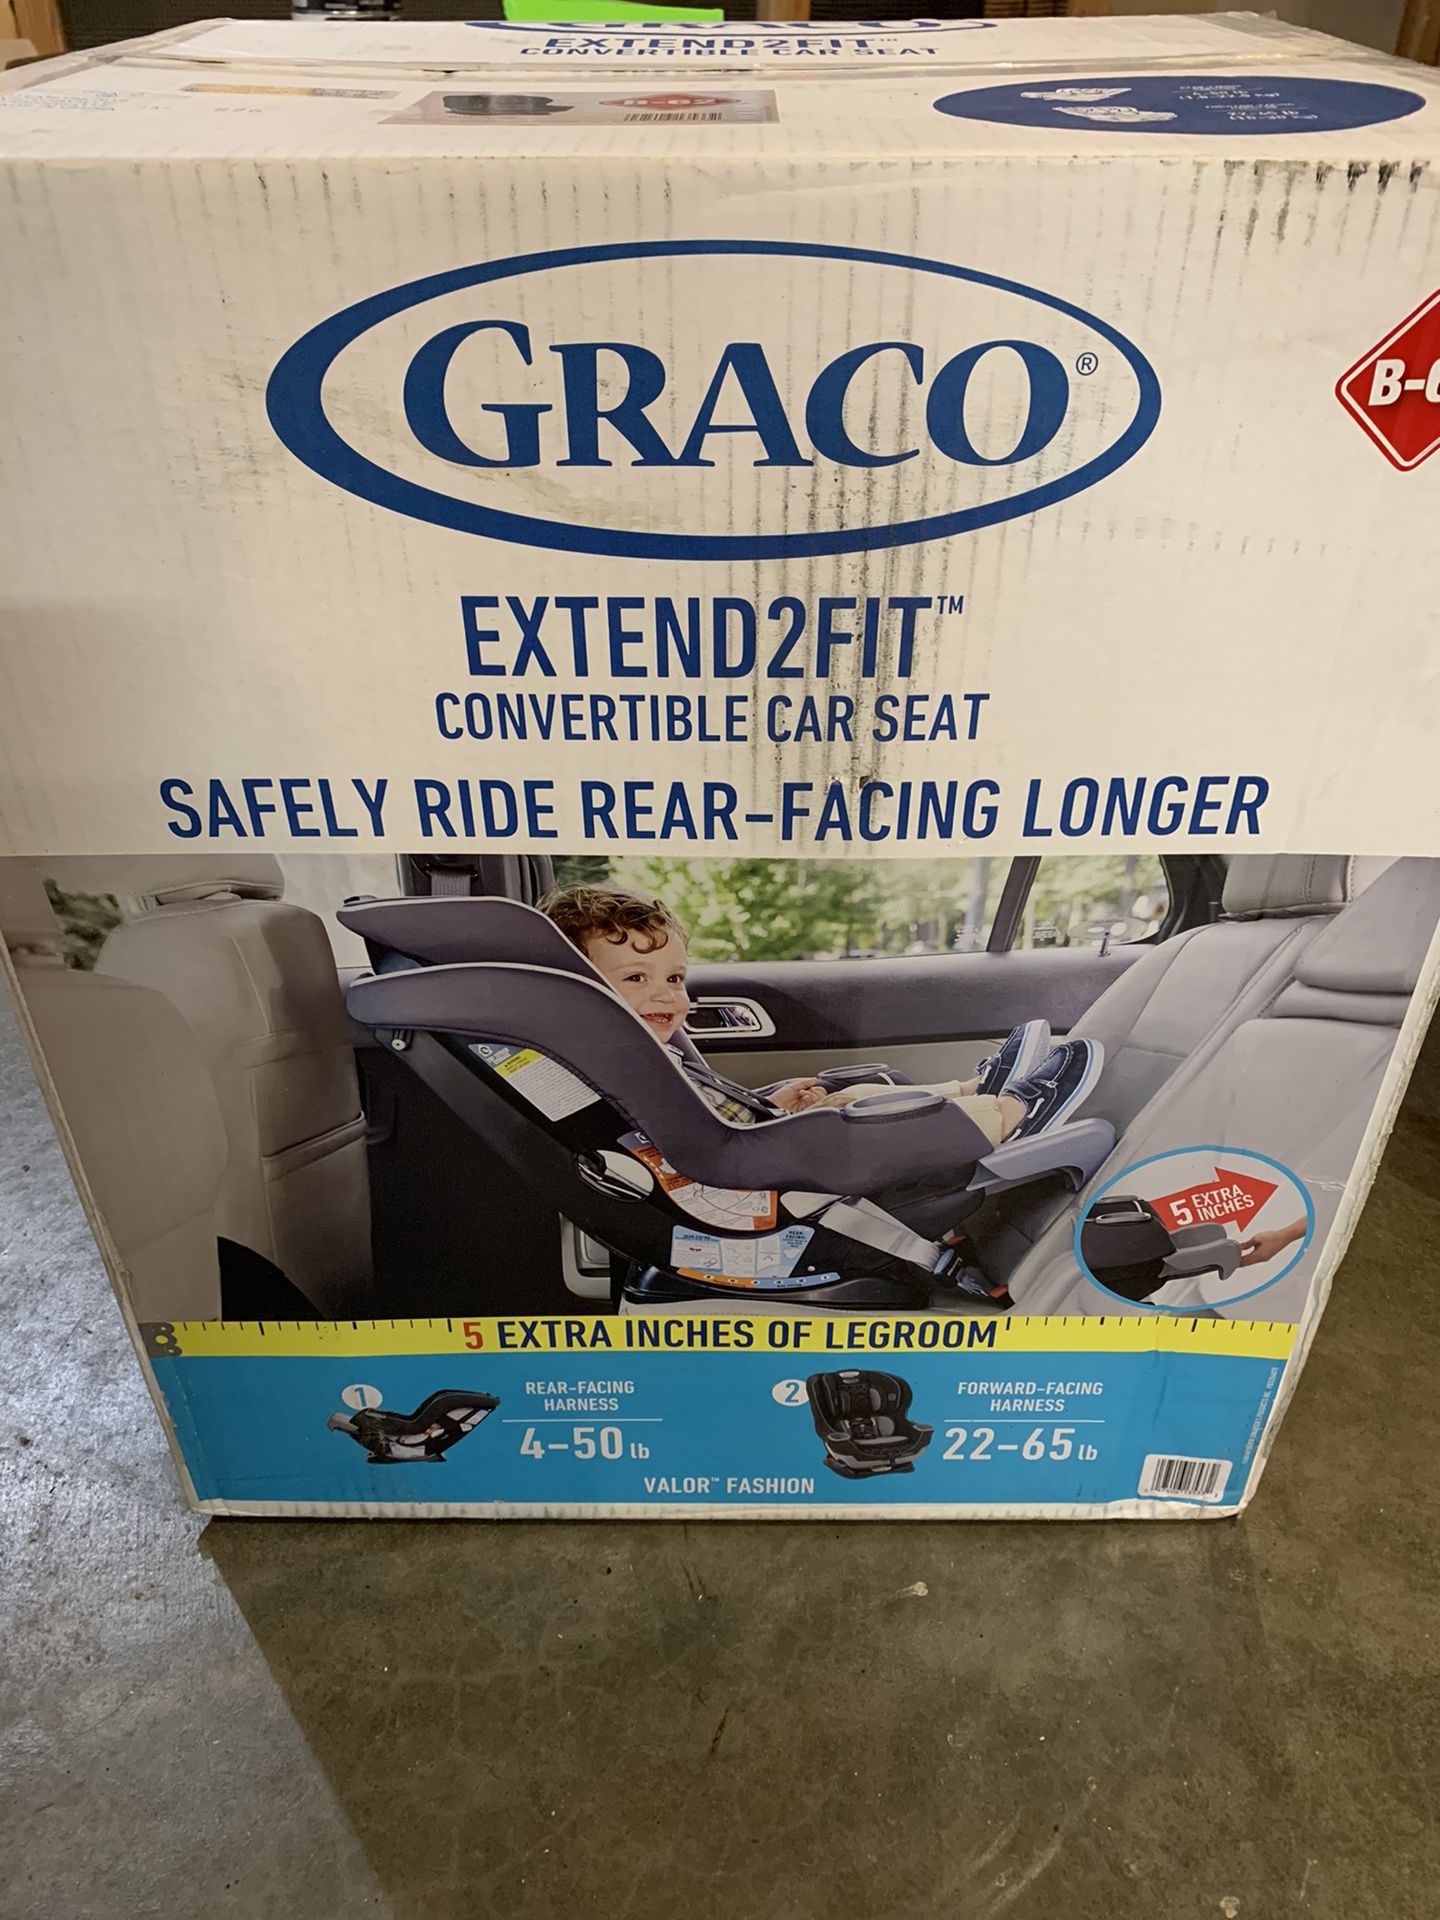 Graco extend2fit convertible car seat